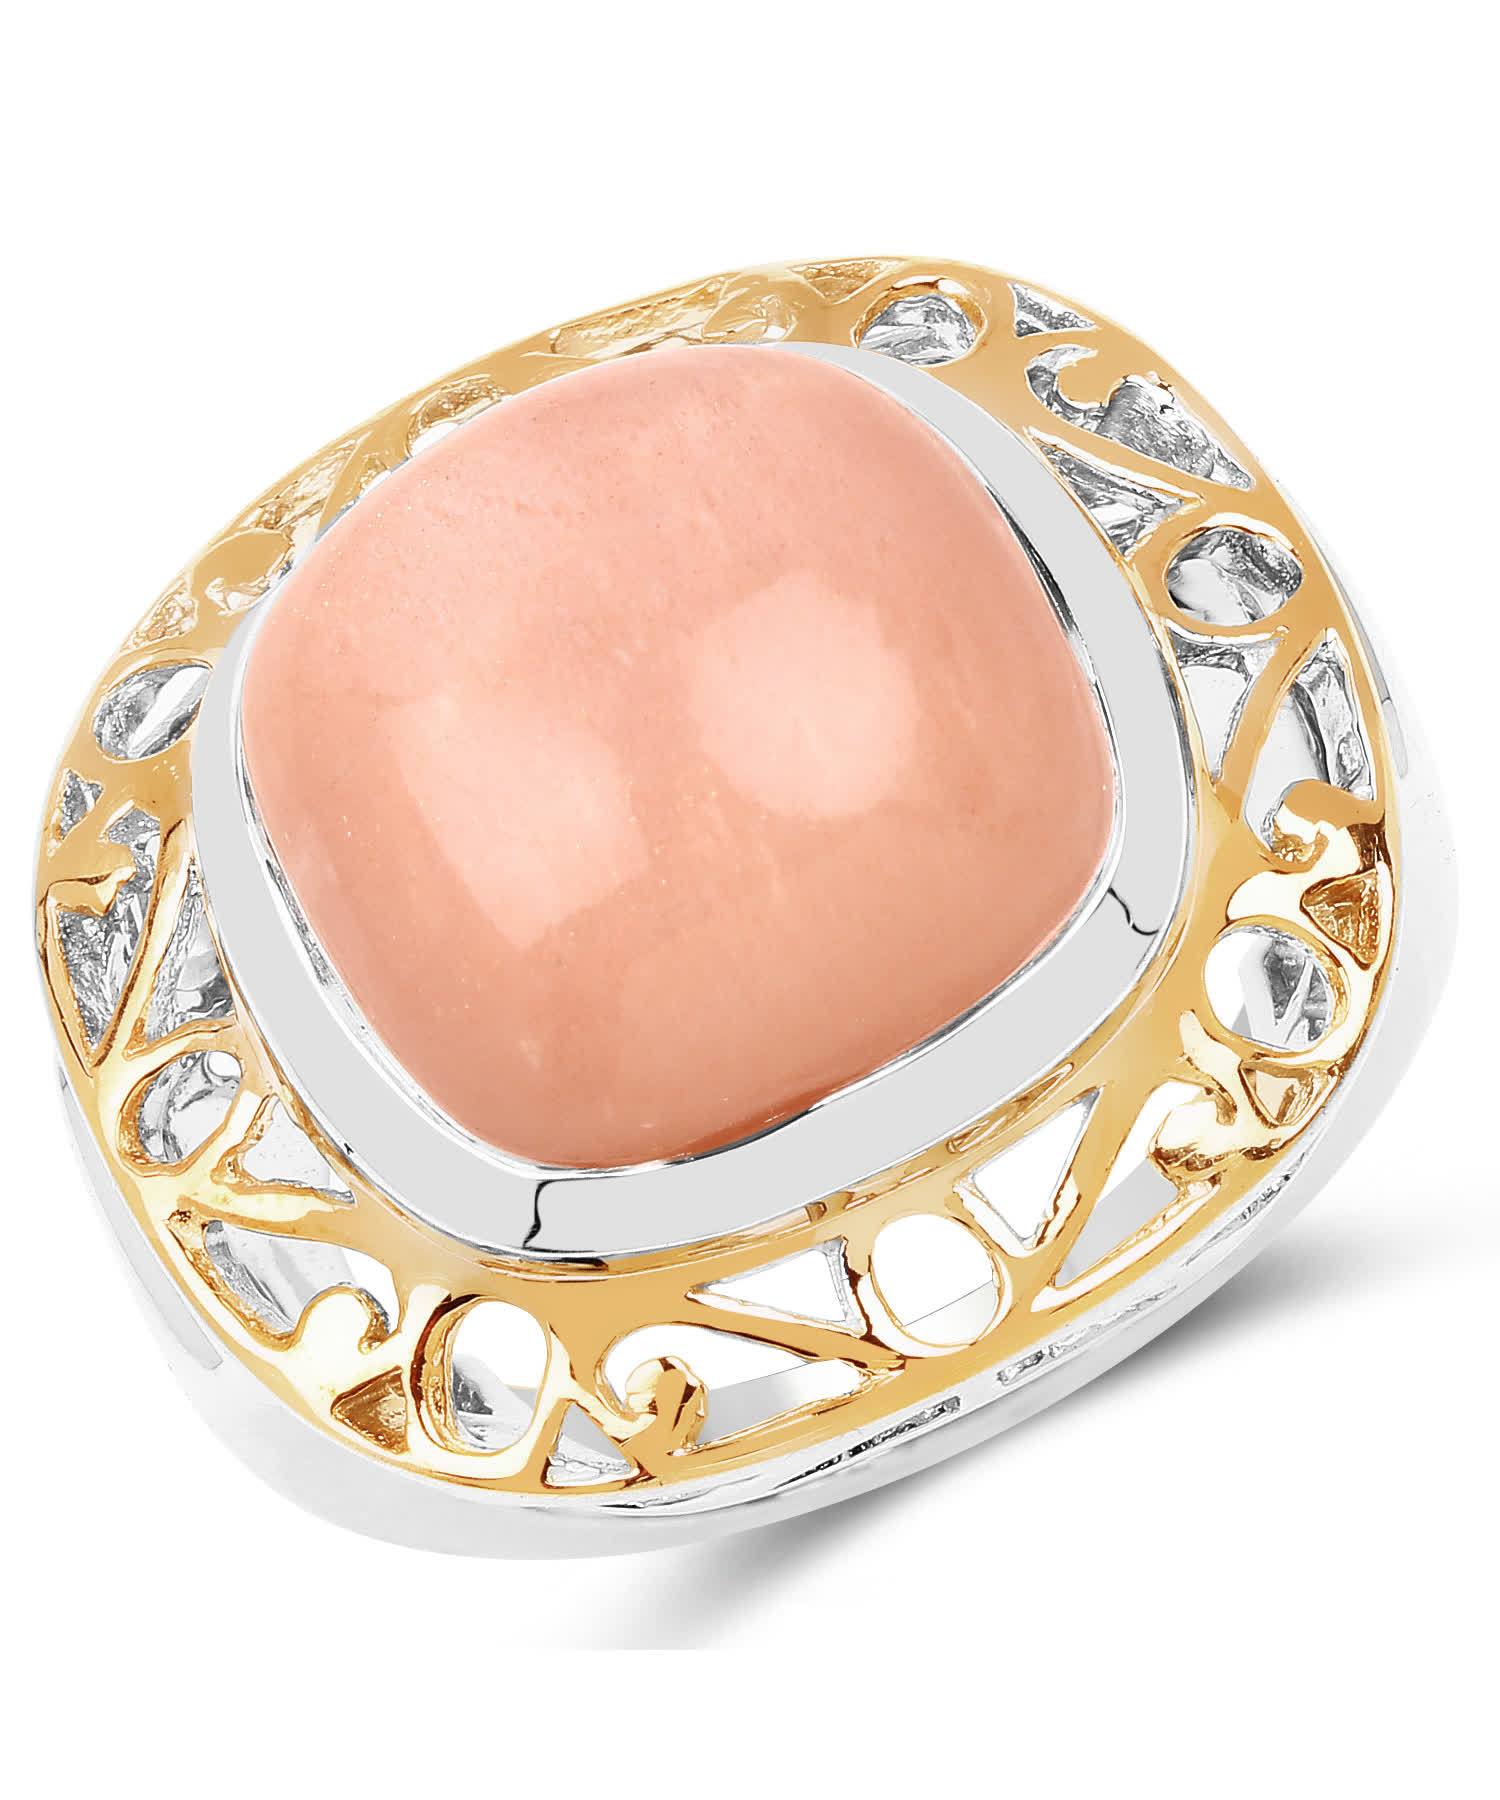 12.80ctw Natural Peach Moonstone Rhodium Plated 925 Sterling Silver Cocktail Ring View 1